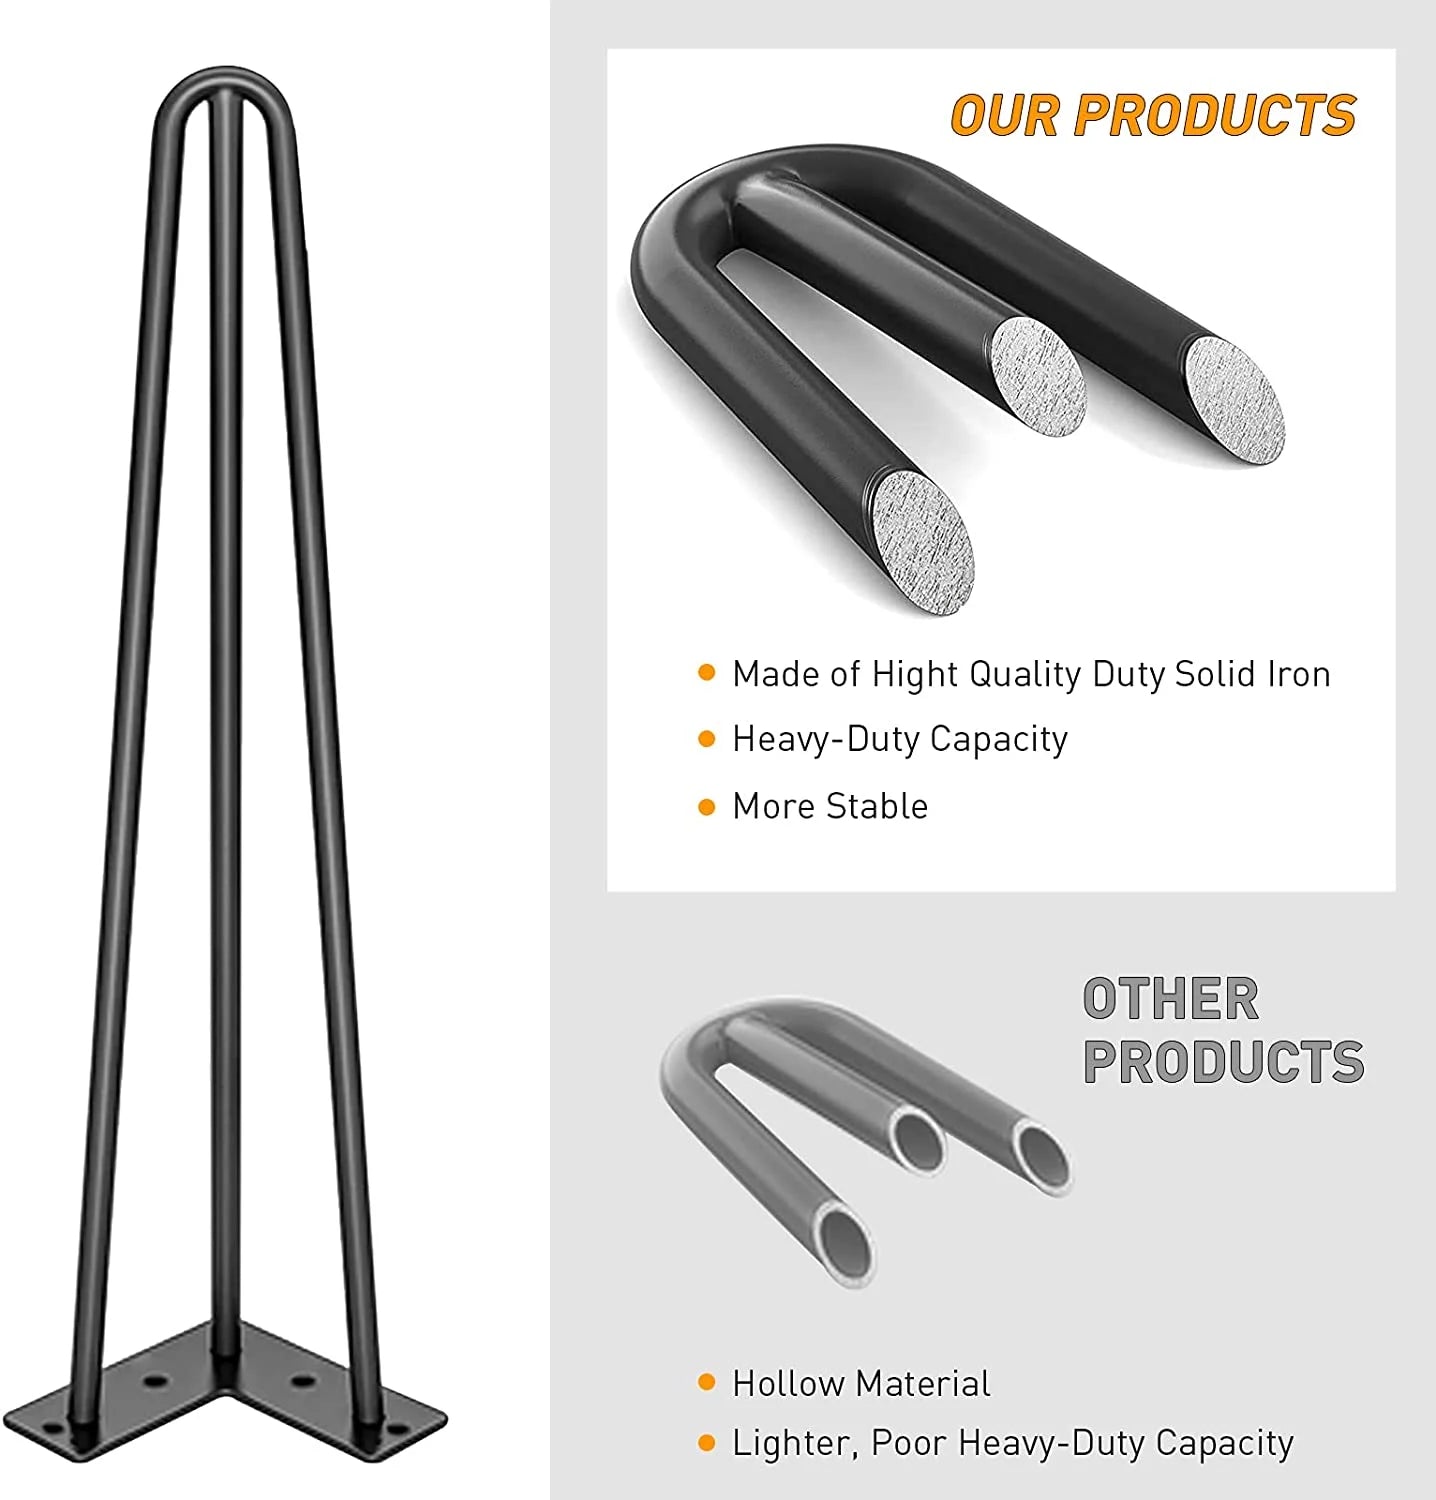 8" Metal Hairpin table legs with heavy duty metal for furniture